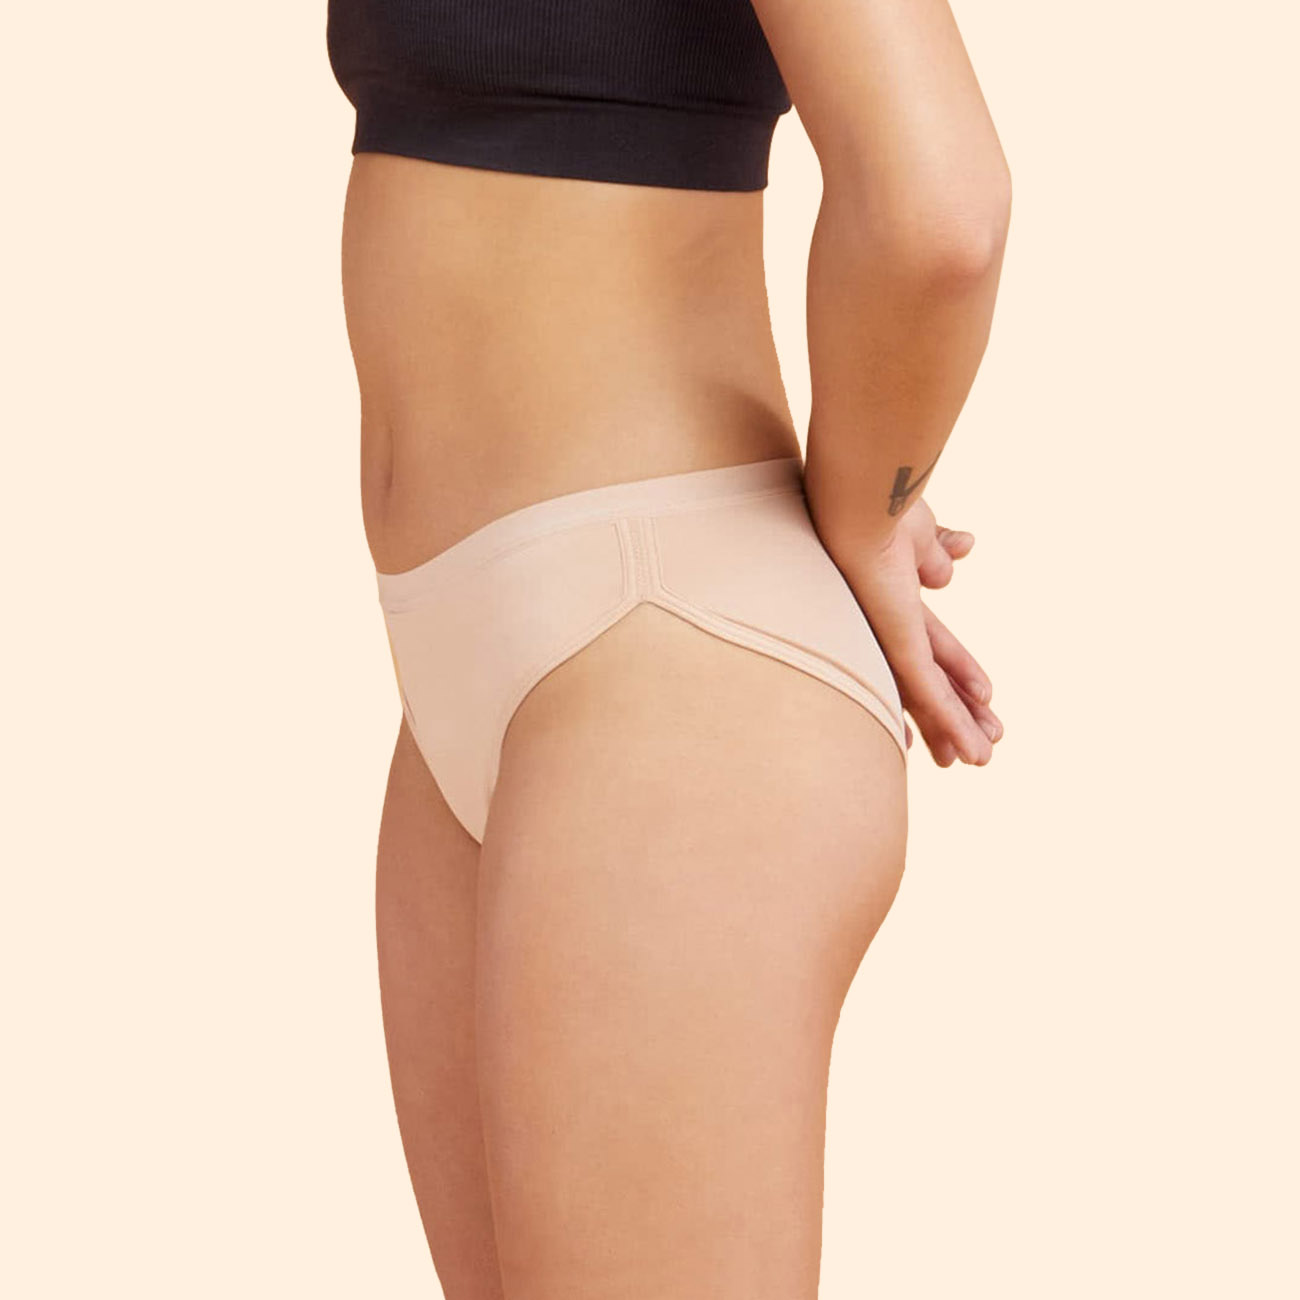 Sport Panties, Period Panties for Working Out